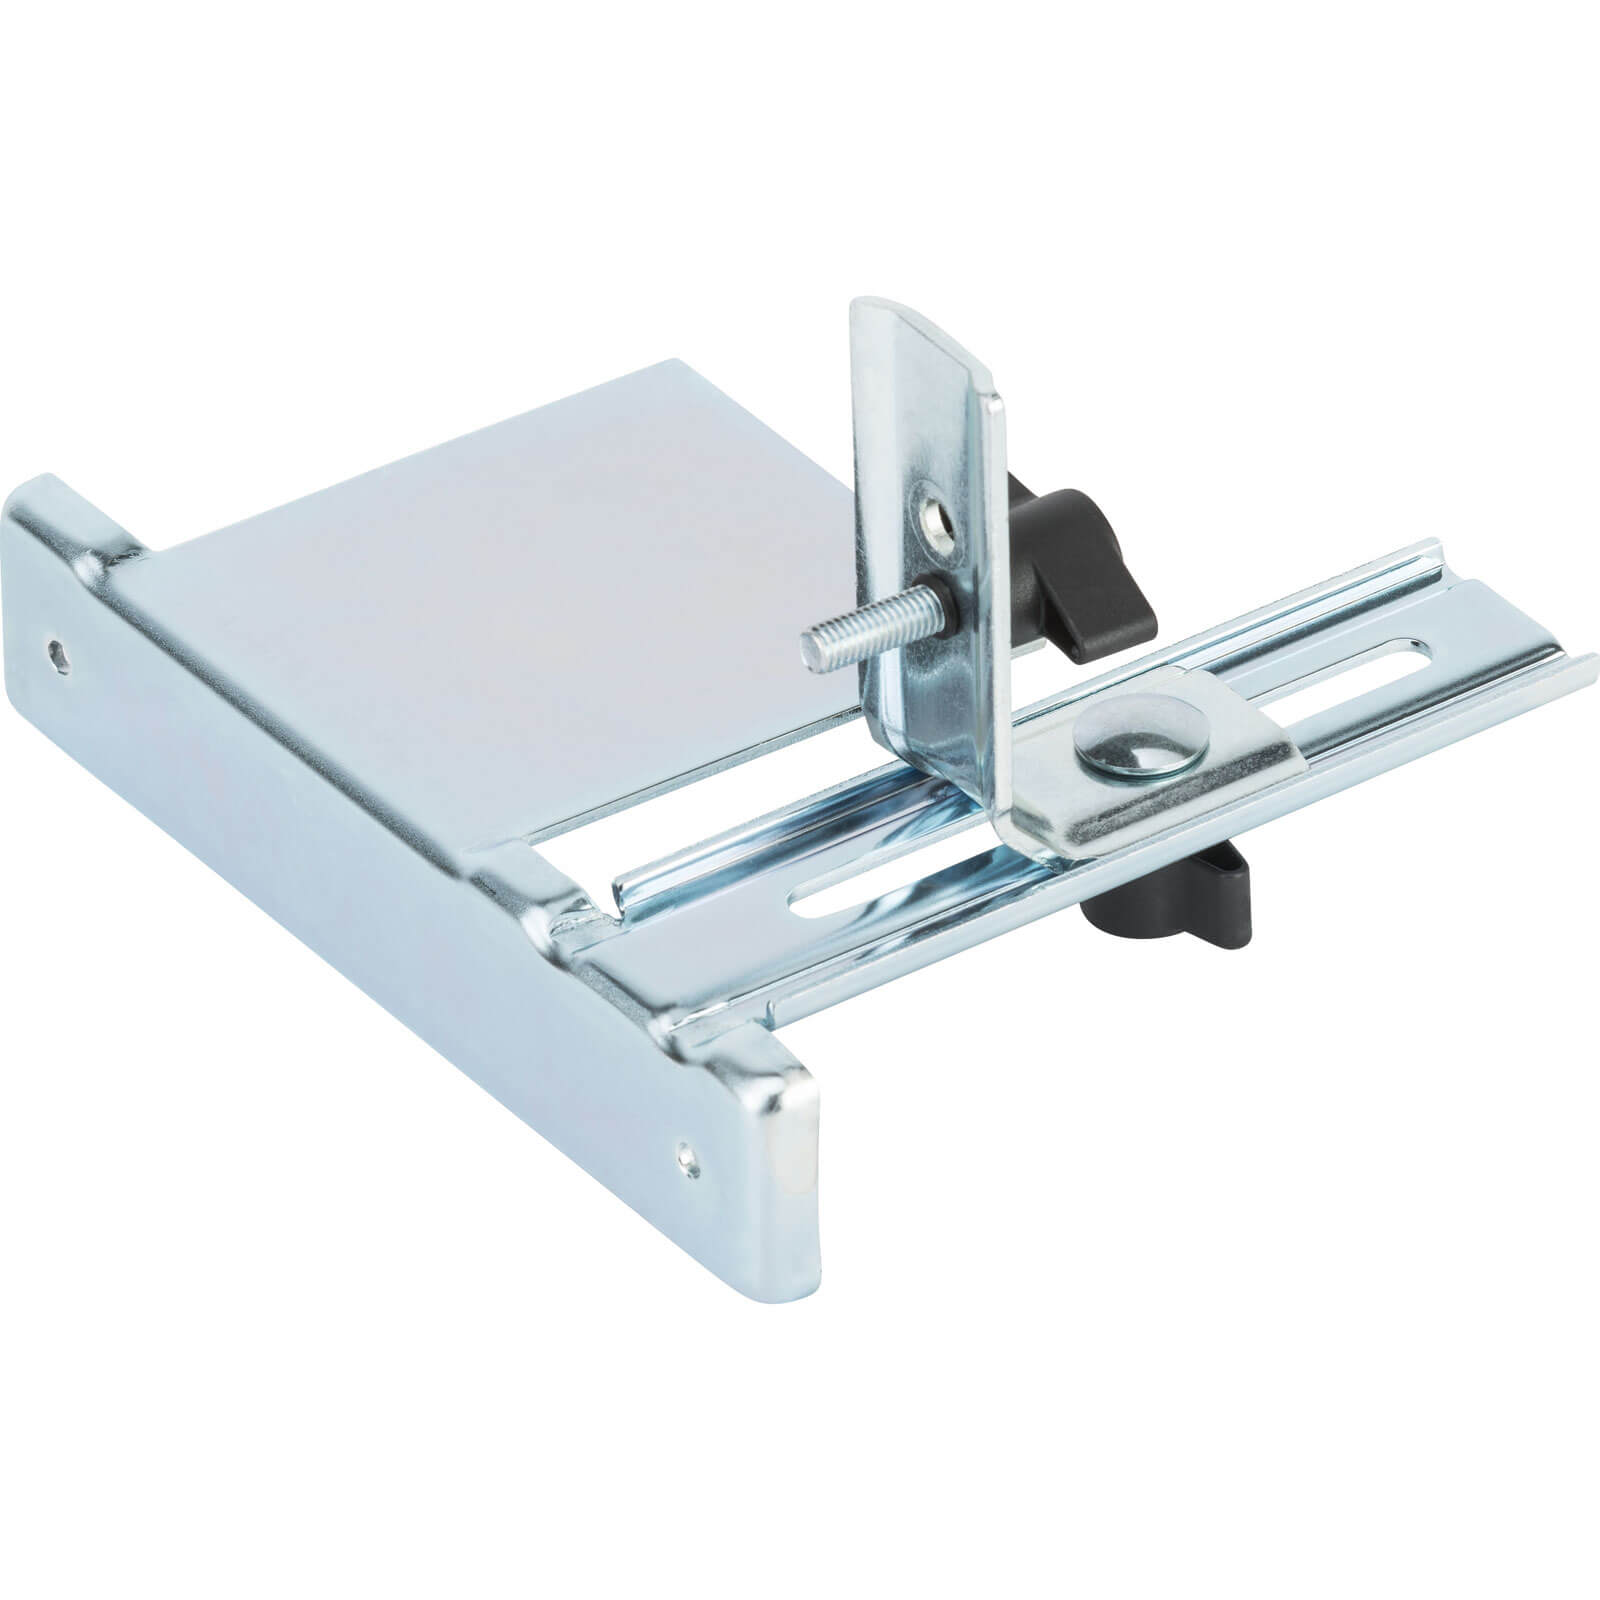 Image of Bosch Parallel Guide for PHO and GHO Planers